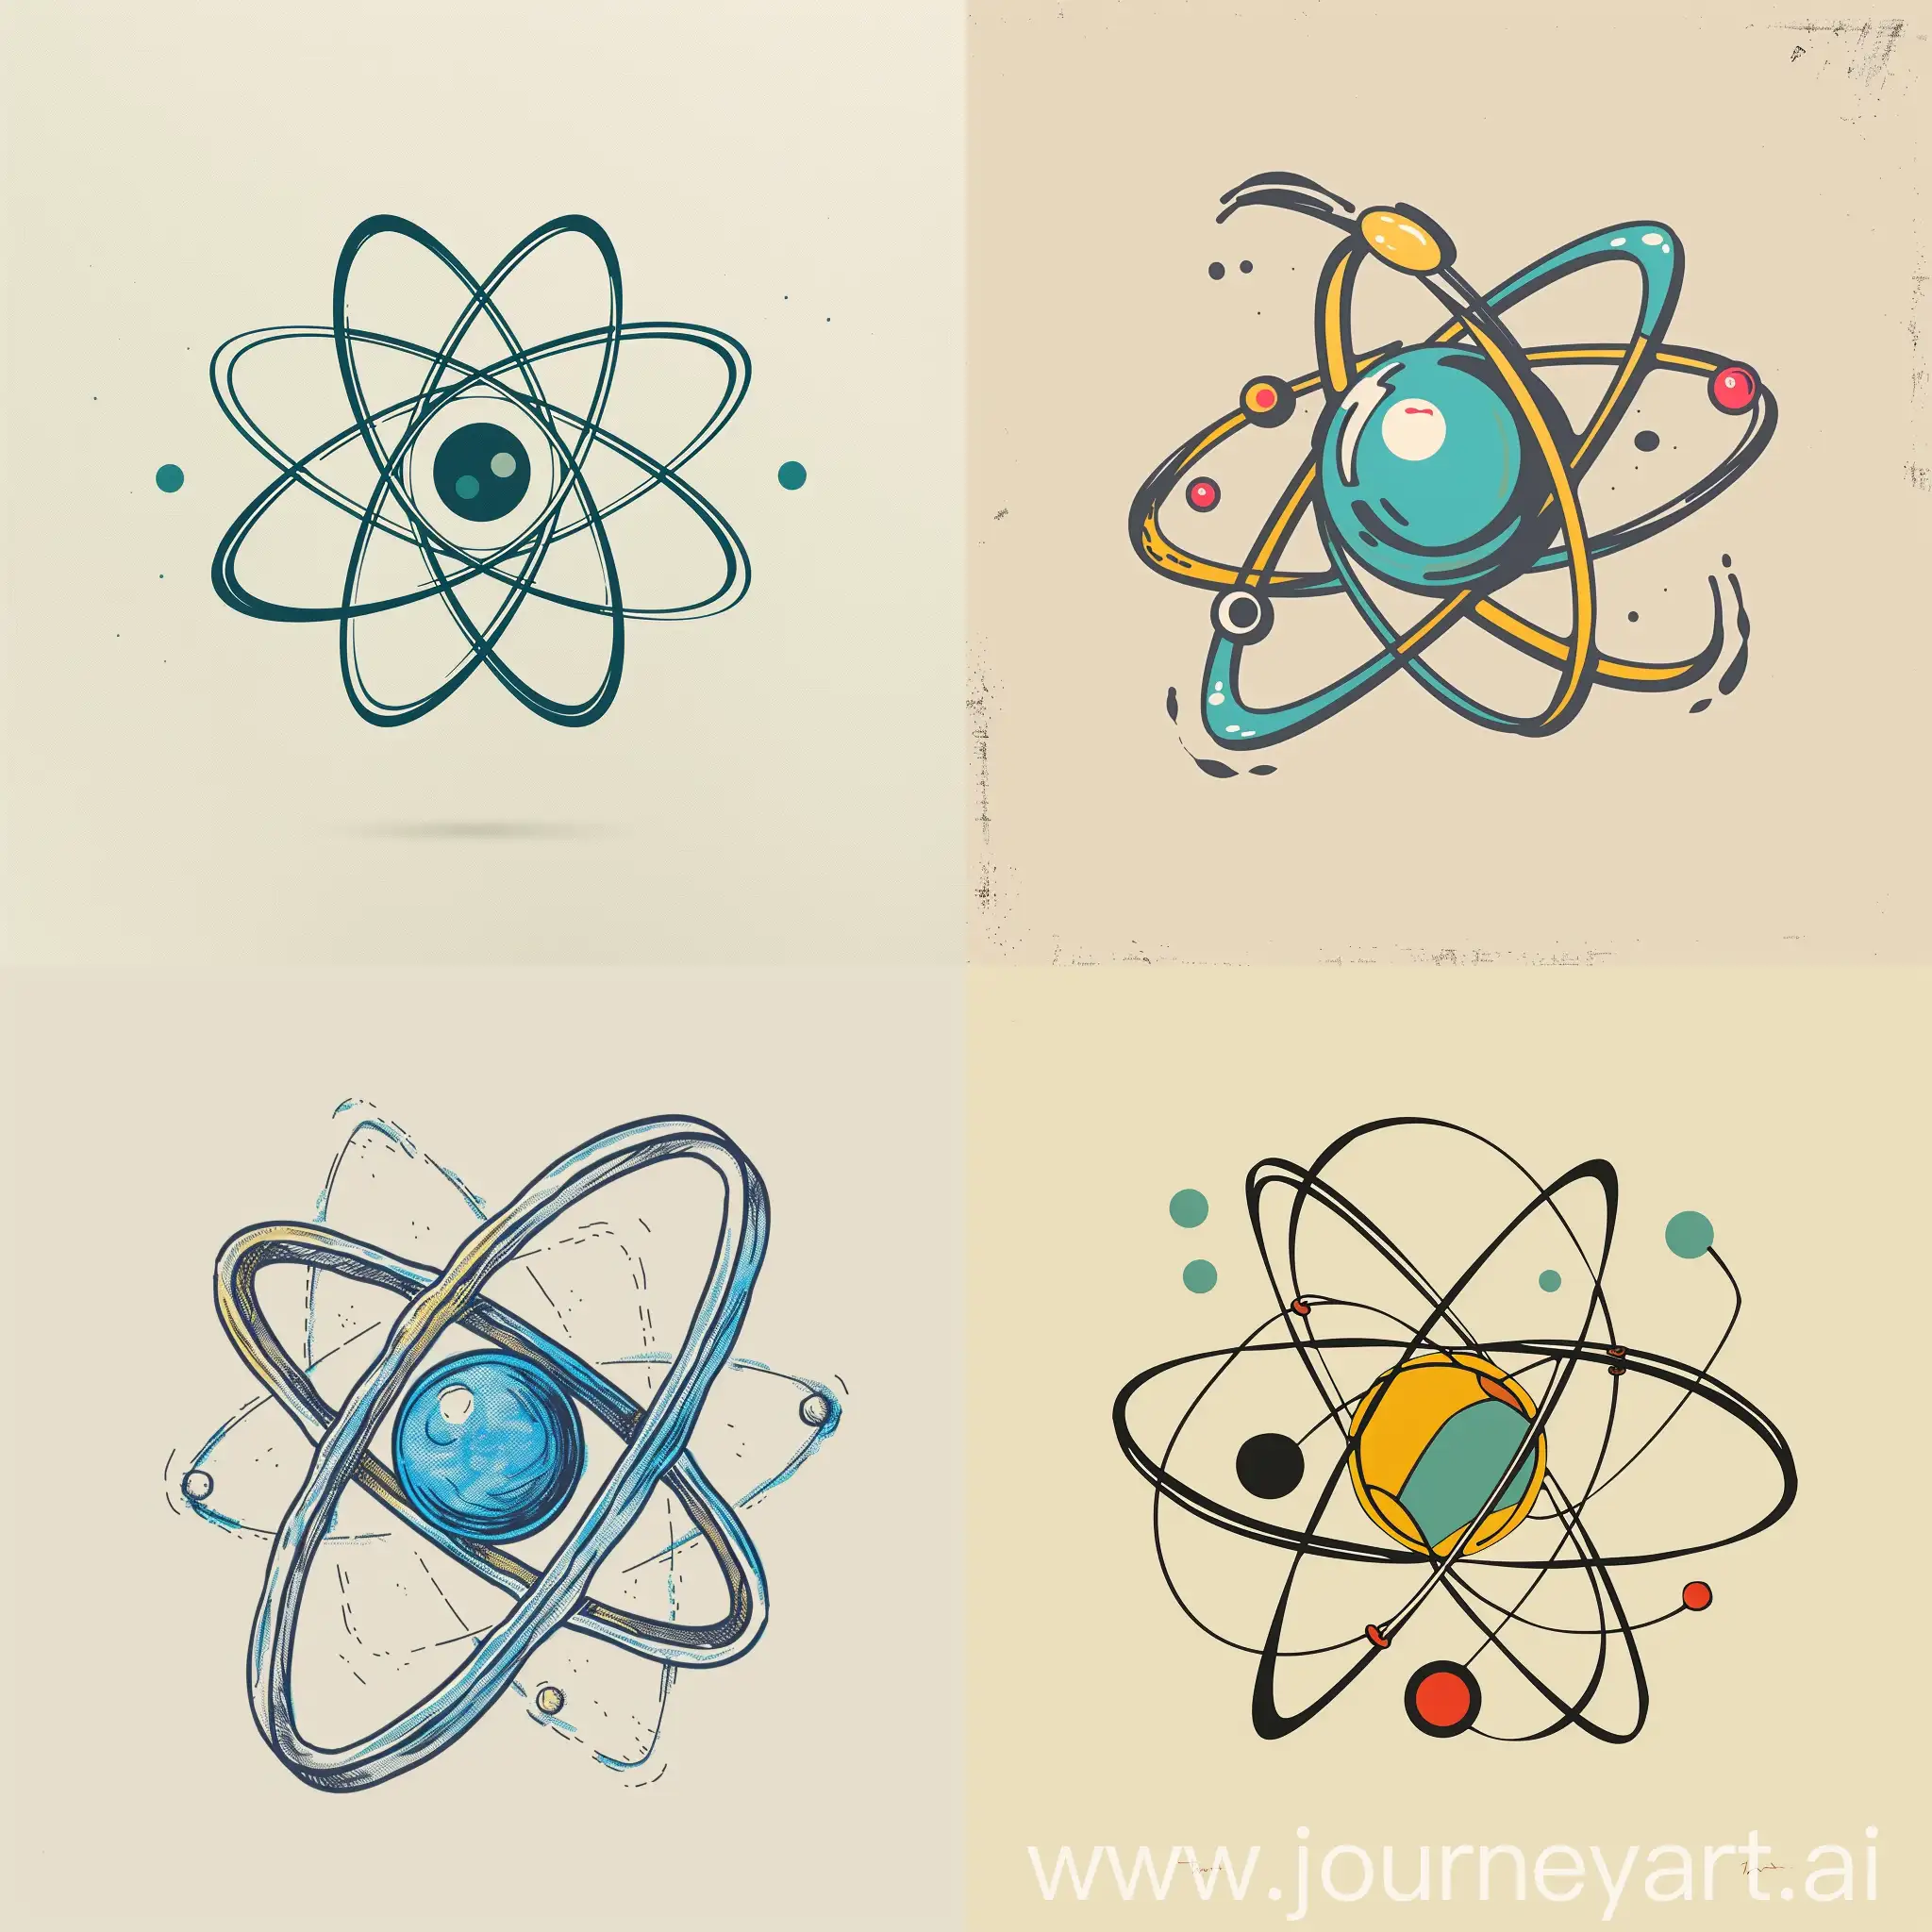 Abstract-Atom-Illustration-in-Graphic-Style